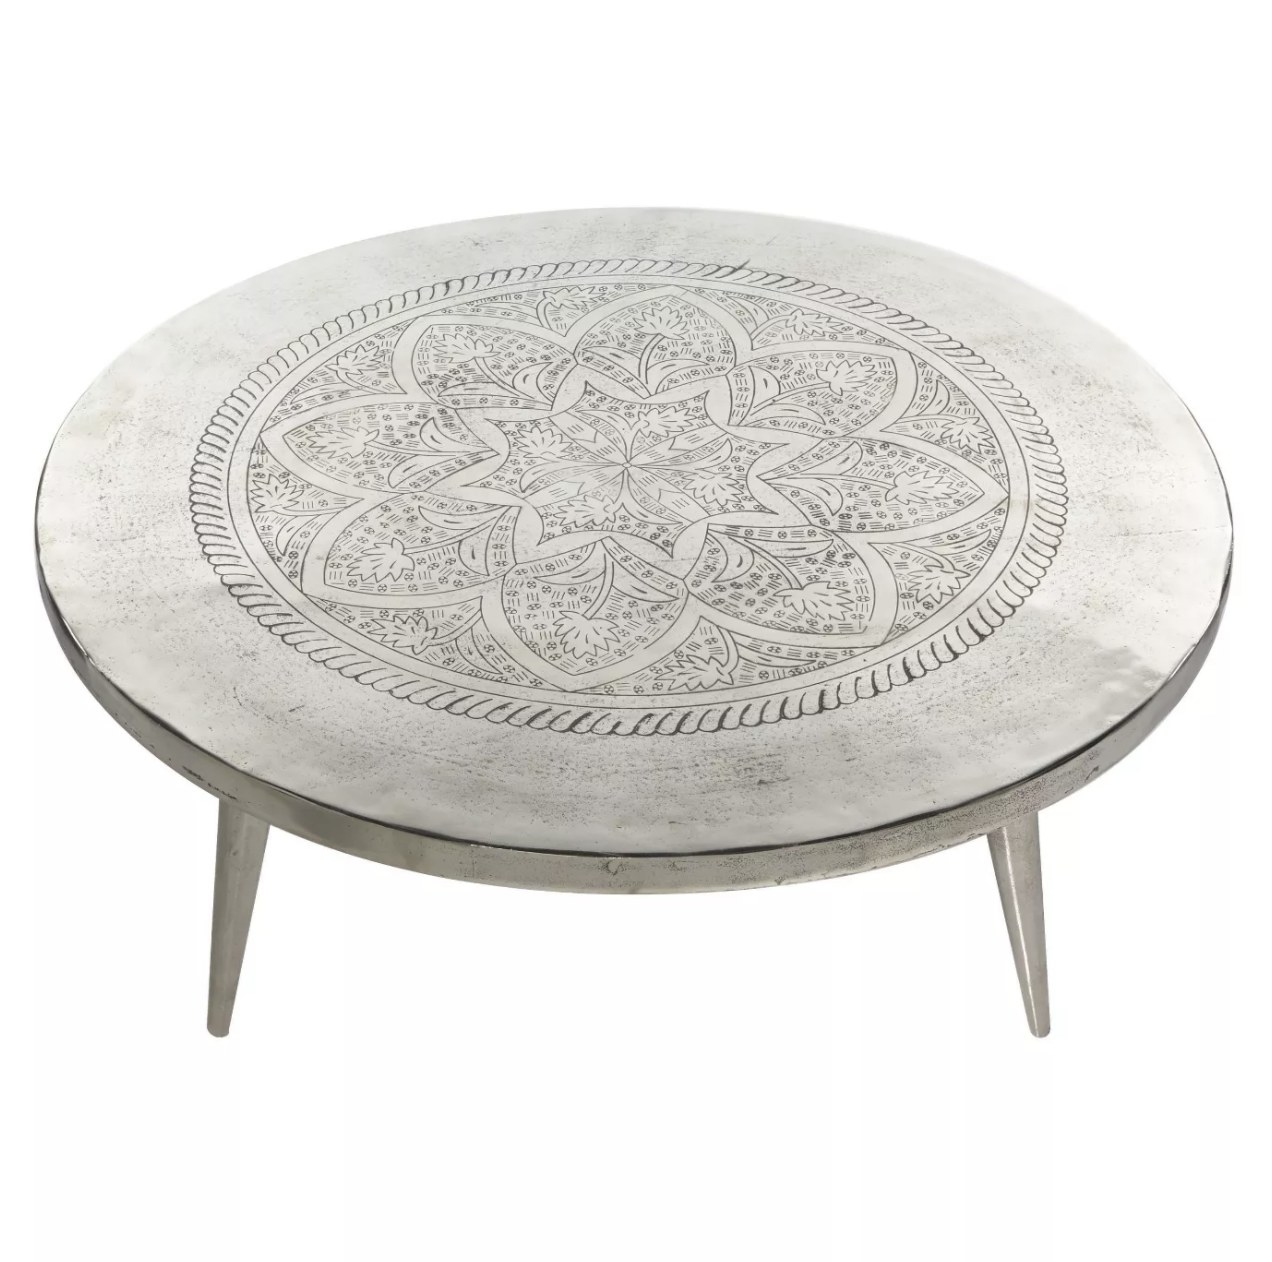 A round, aluminum coffee table with a mandala design